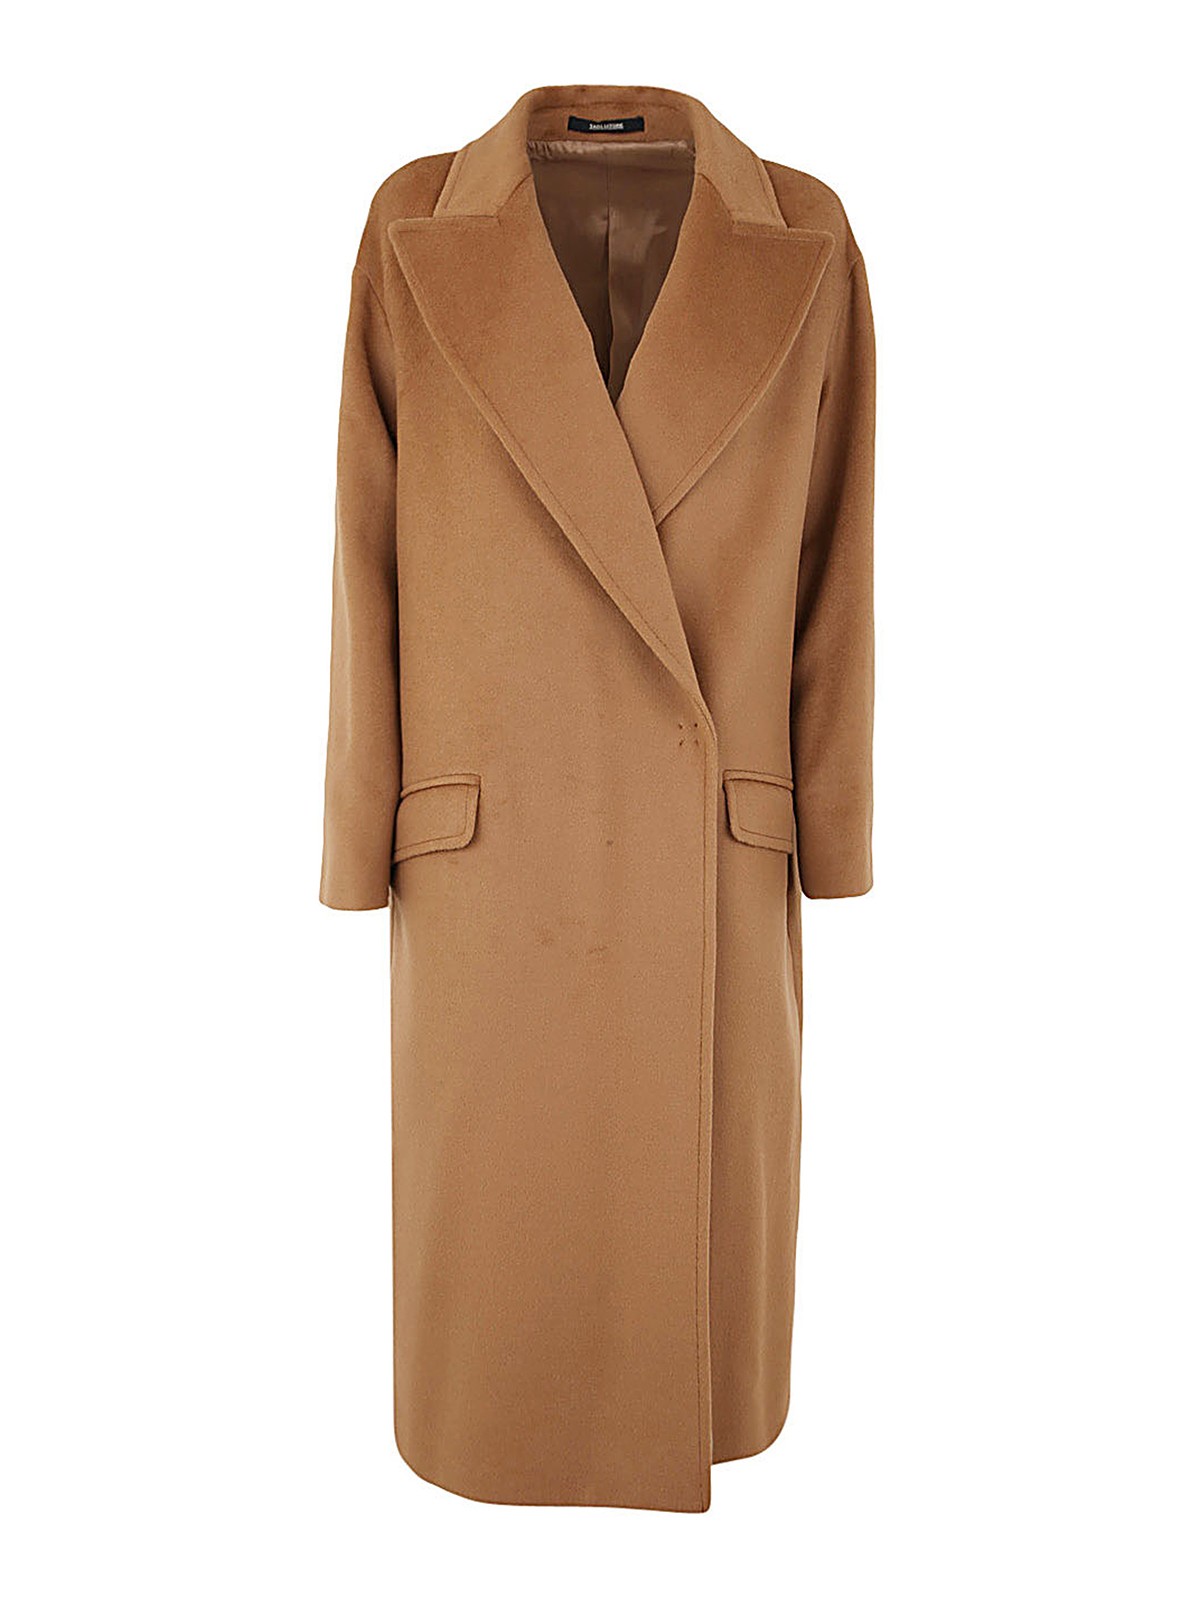 TAGLIATORE DOUBLE BREASTED COCOON COAT